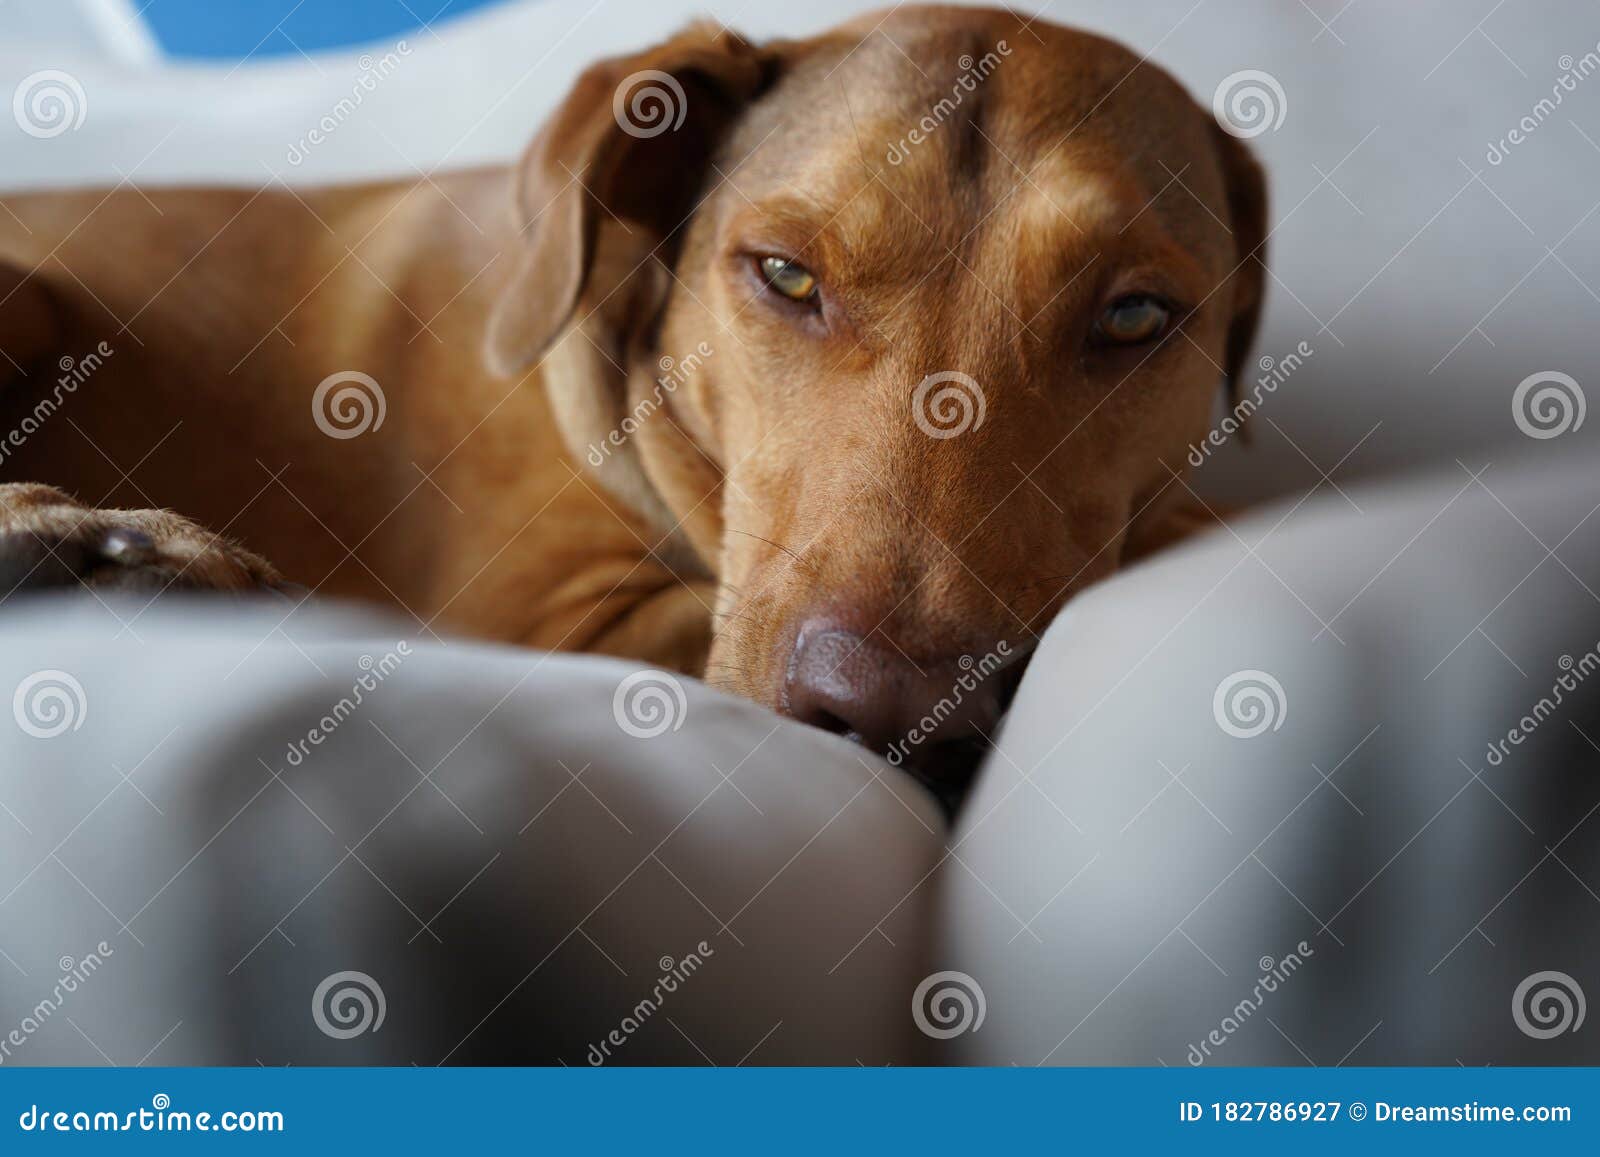 Brown Short-haired Dog with Green Eyes Stock Image - Image of comfort,  domestic: 182786927